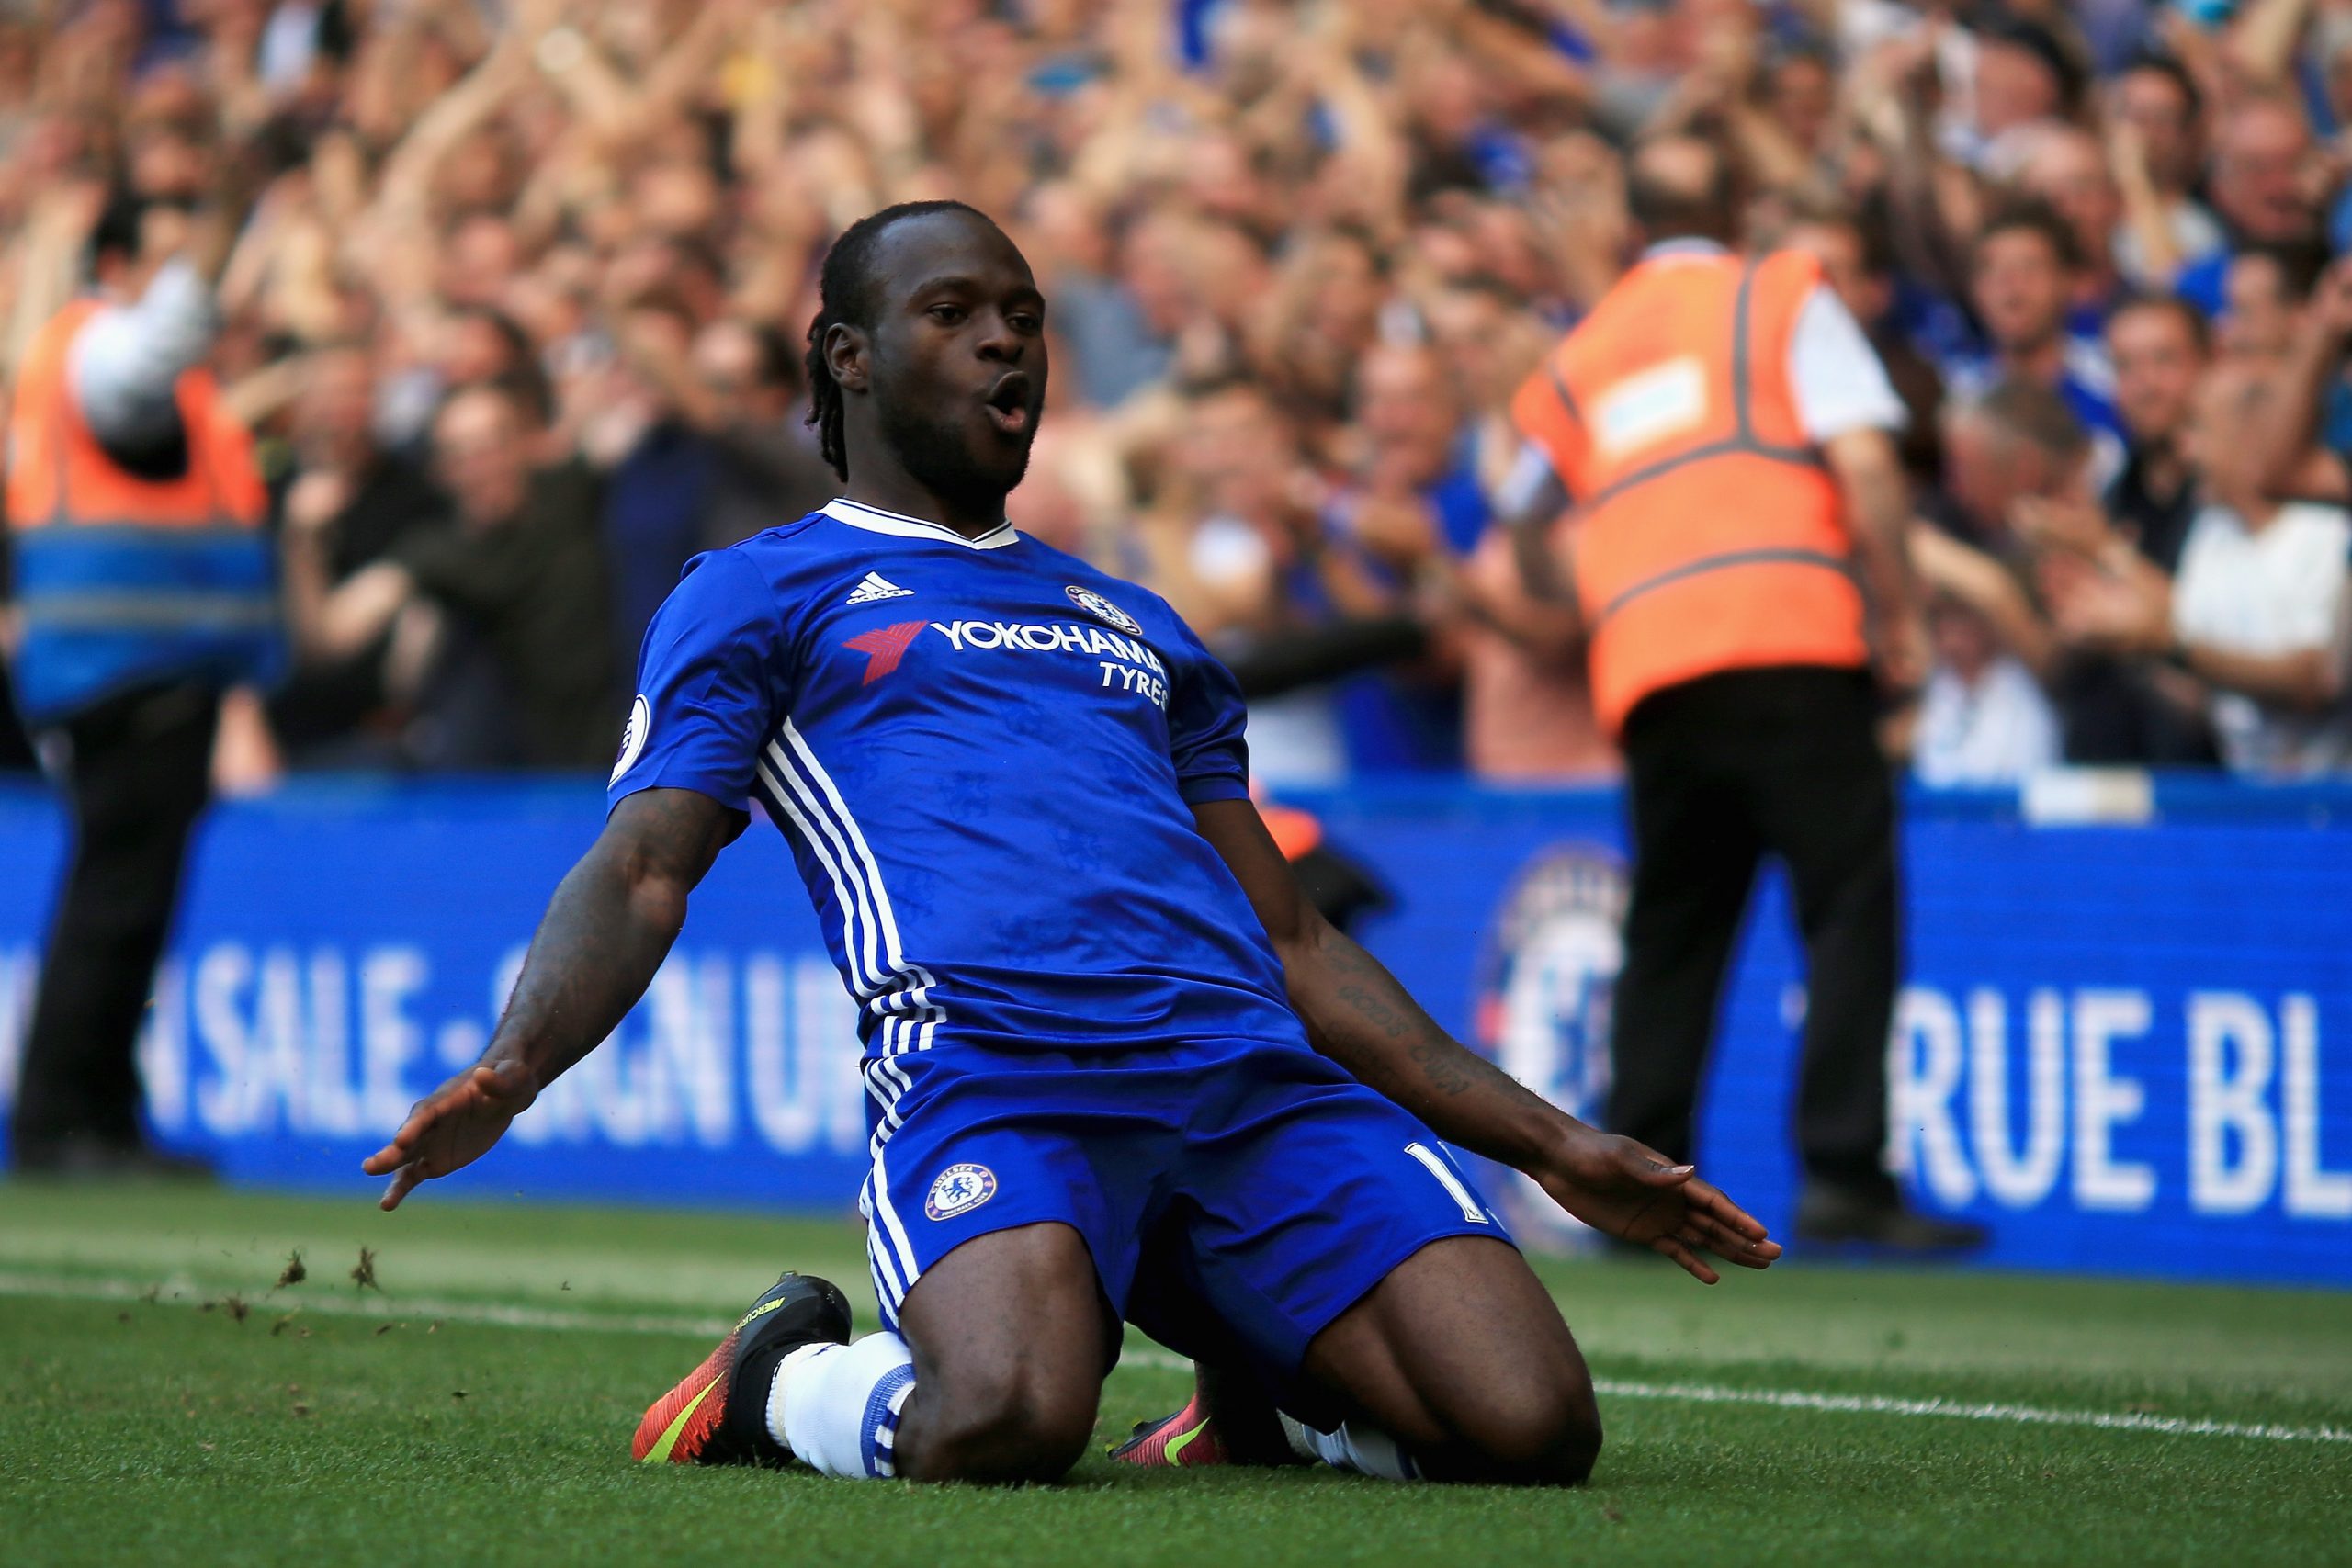 Victor Moses photo